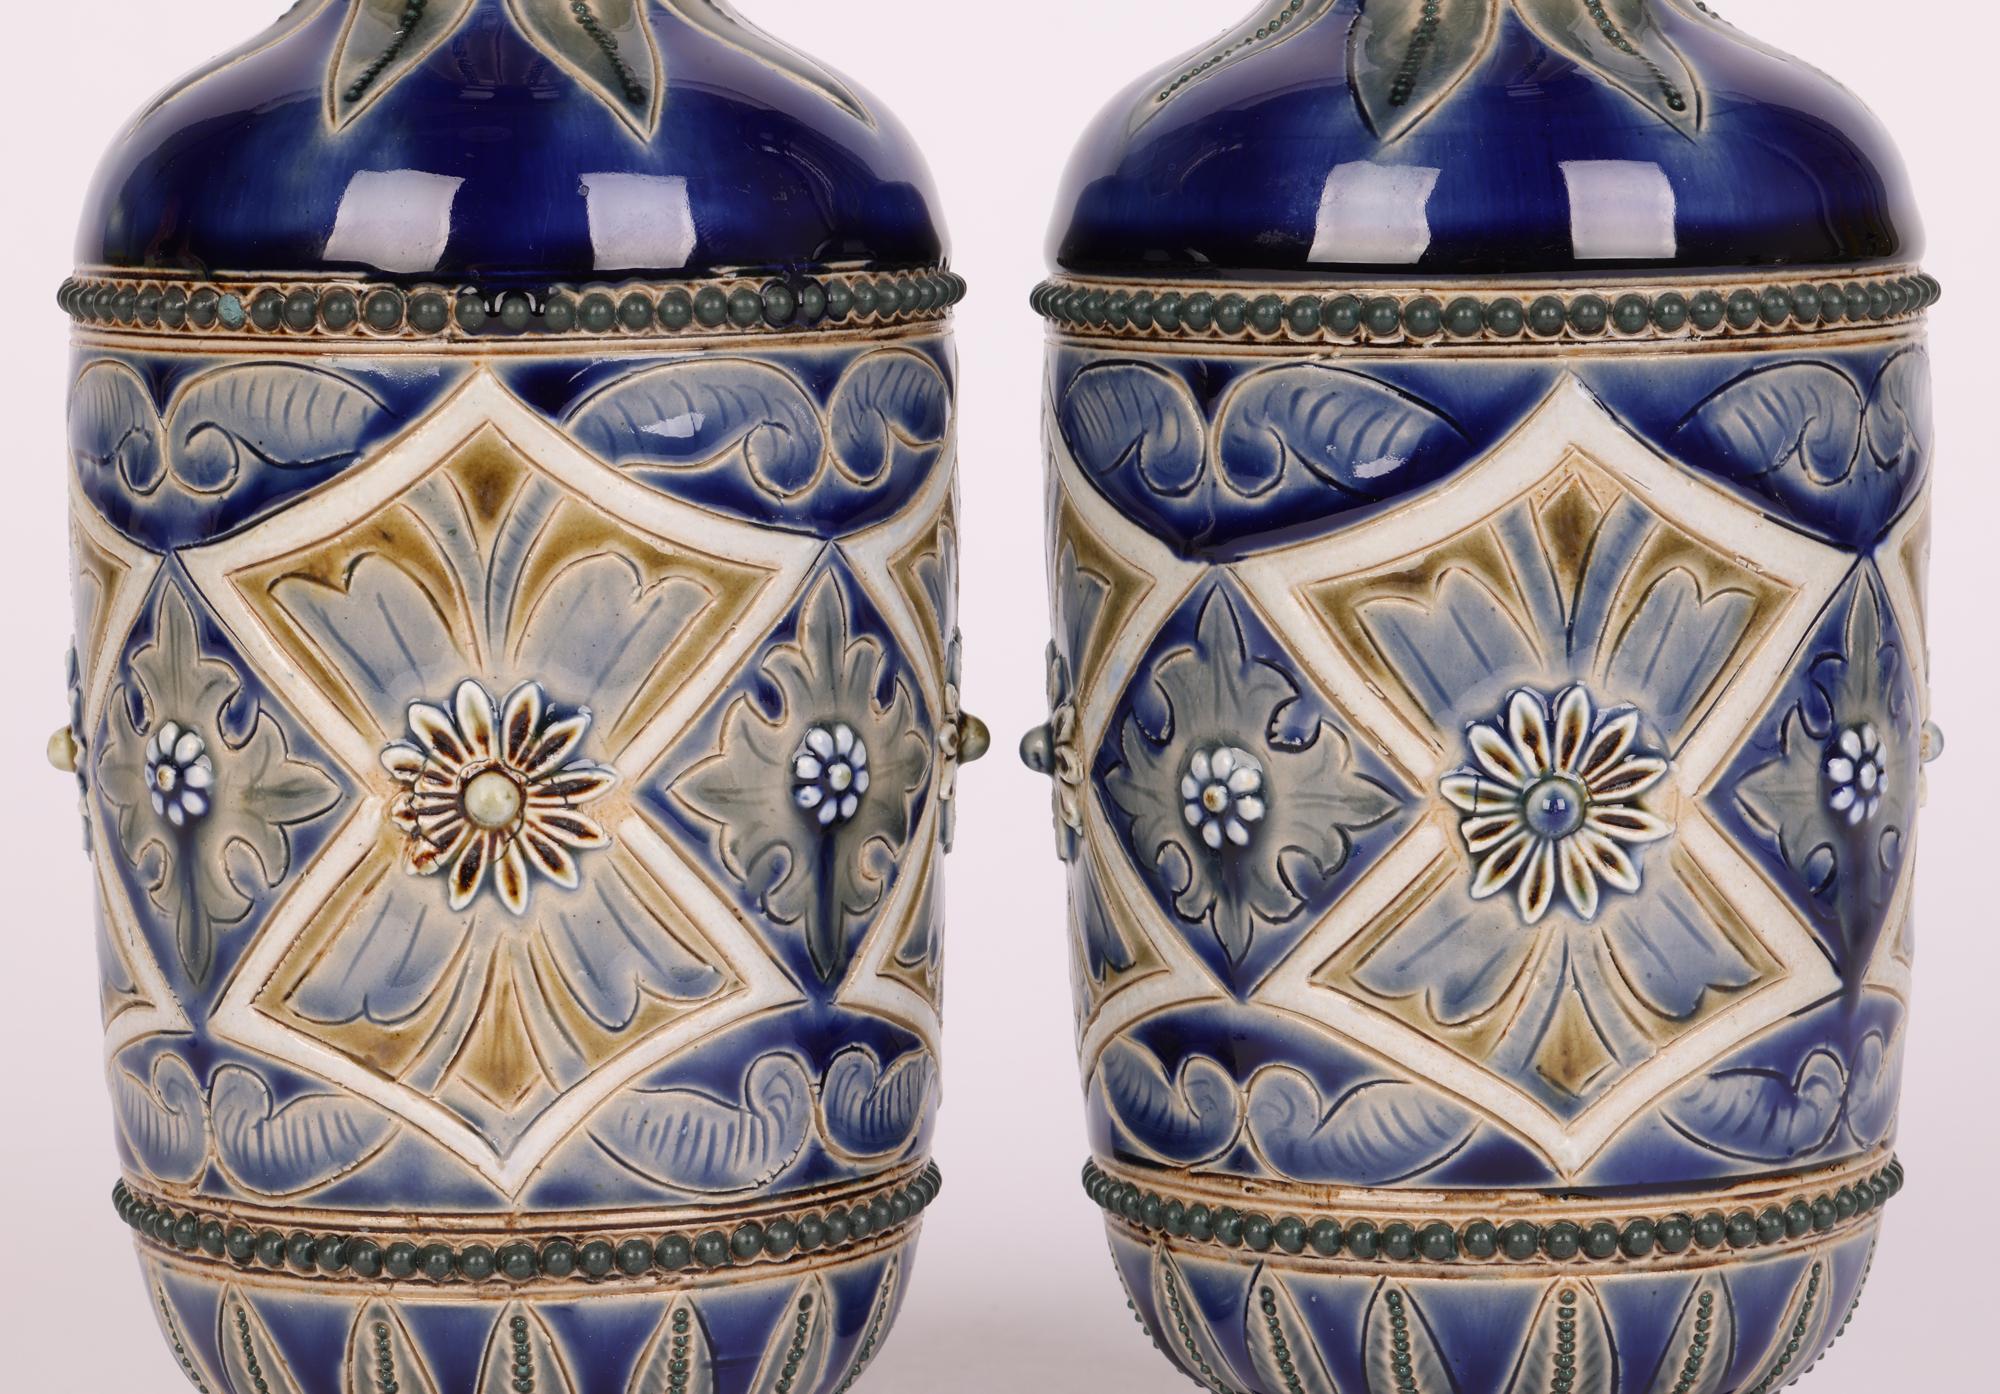 A stylish and decorative pair Aesthetic Movement Doulton Lambeth stoneware vases decorated with stylized floral designs by renowned artist Frank A Butler and dated 1882. The bottle shaped vases stand on a narrow round pedestal foot with cylindrical